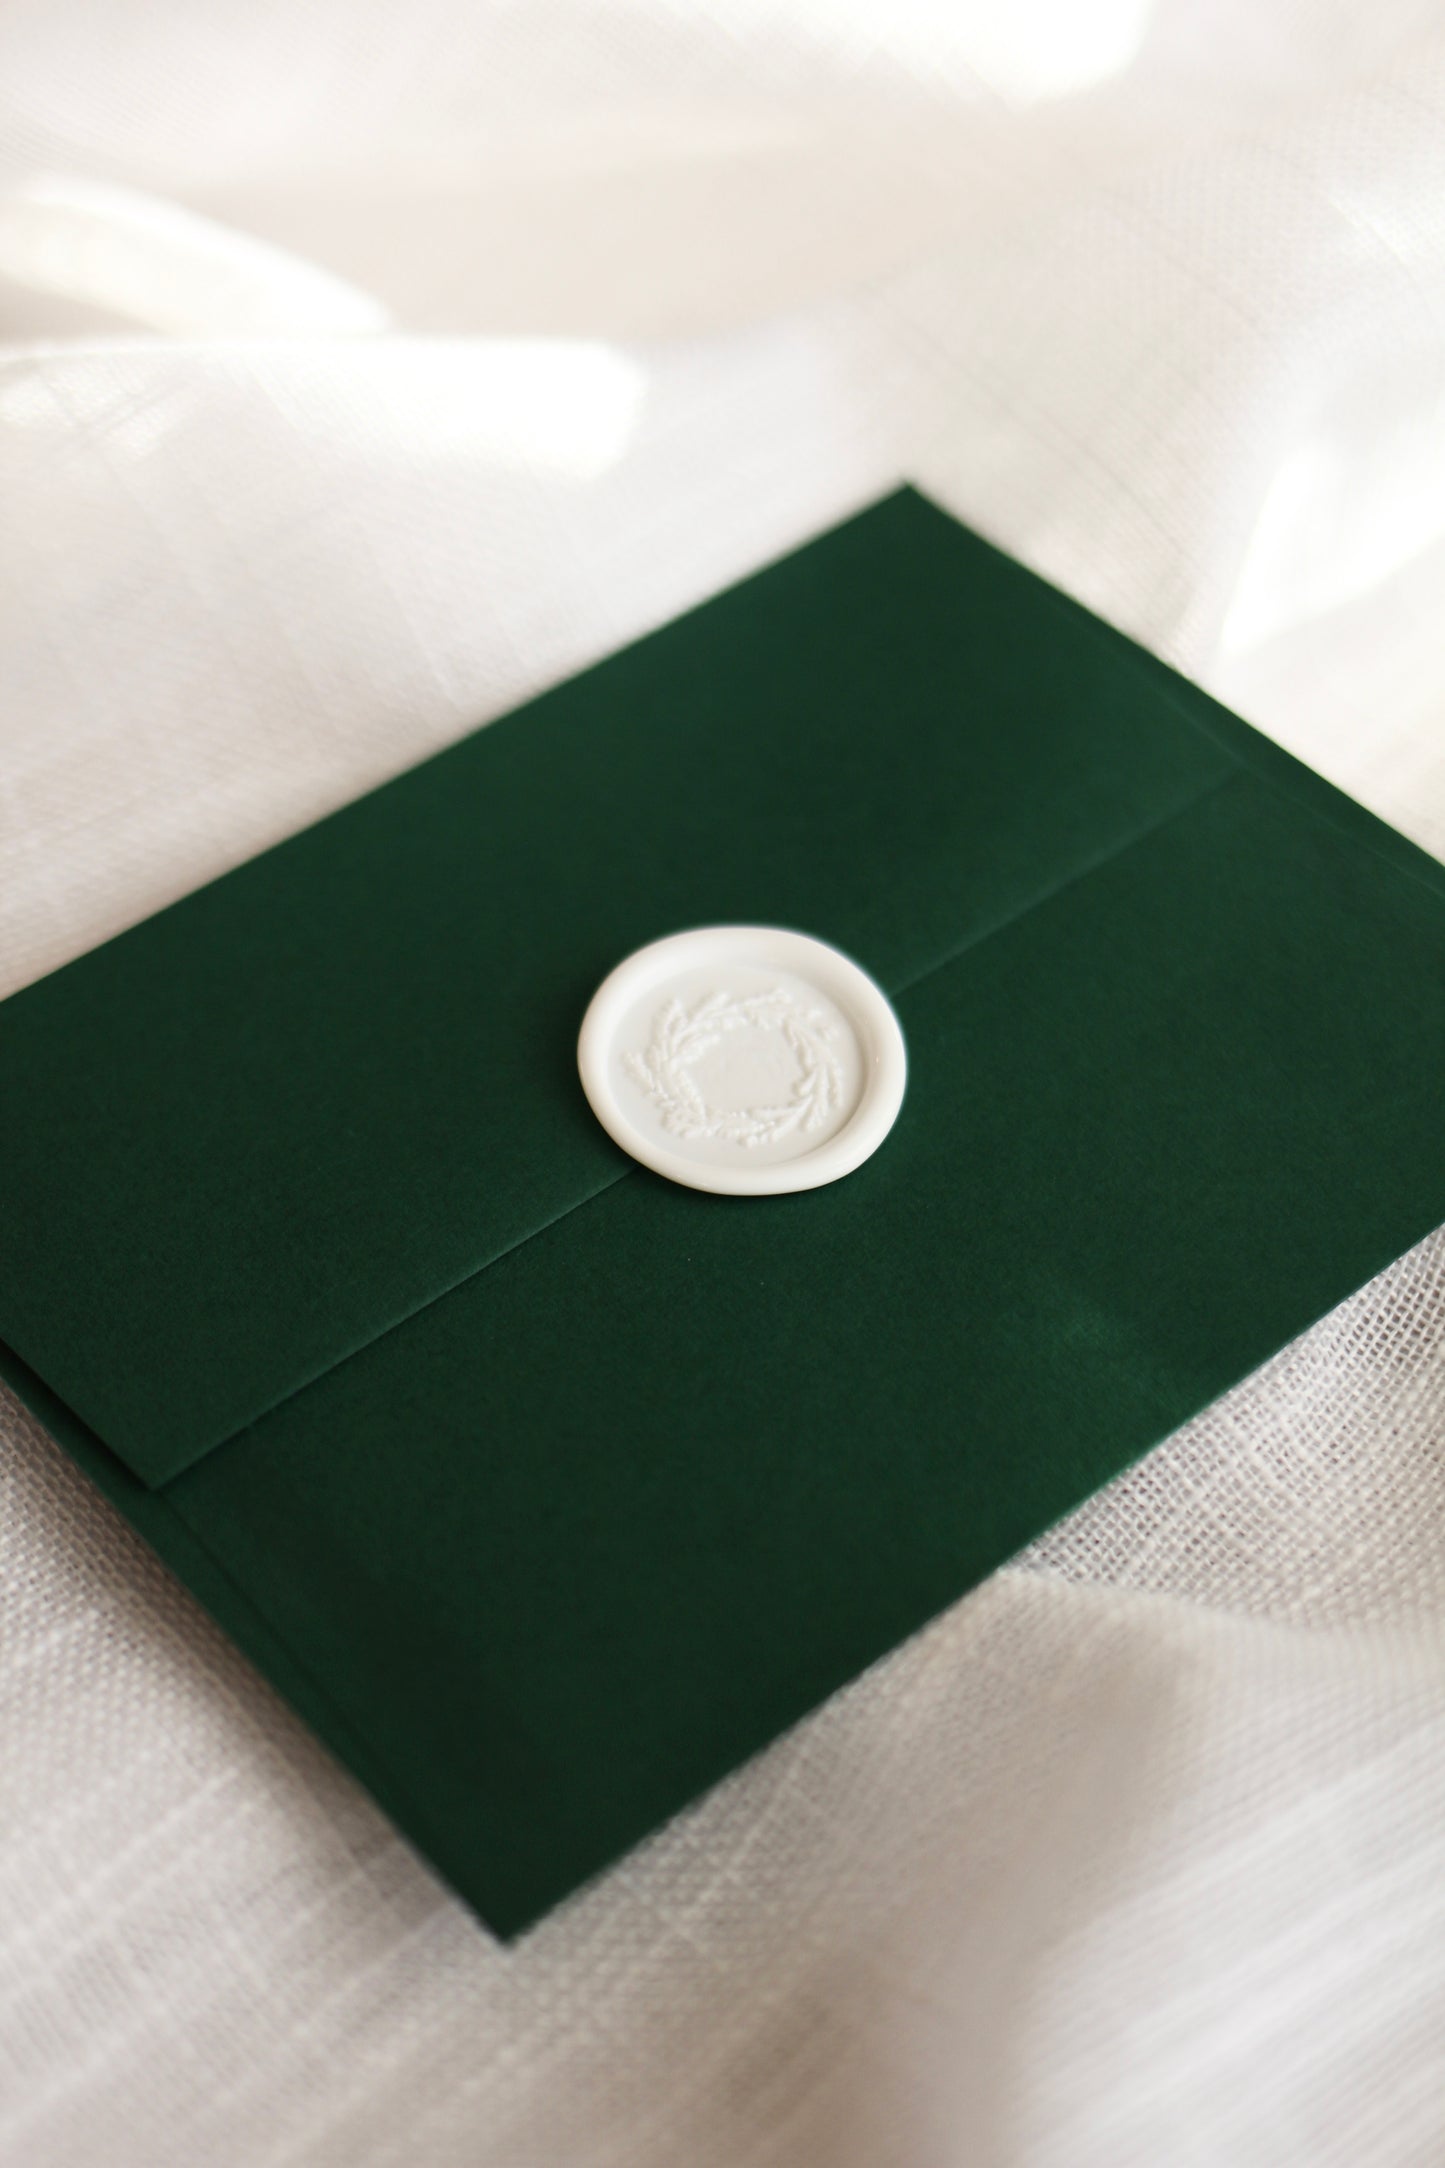 Winter White Wax Seals | Elegant handcrafted designs | Self-adhesive hand stamped wax seal stickers